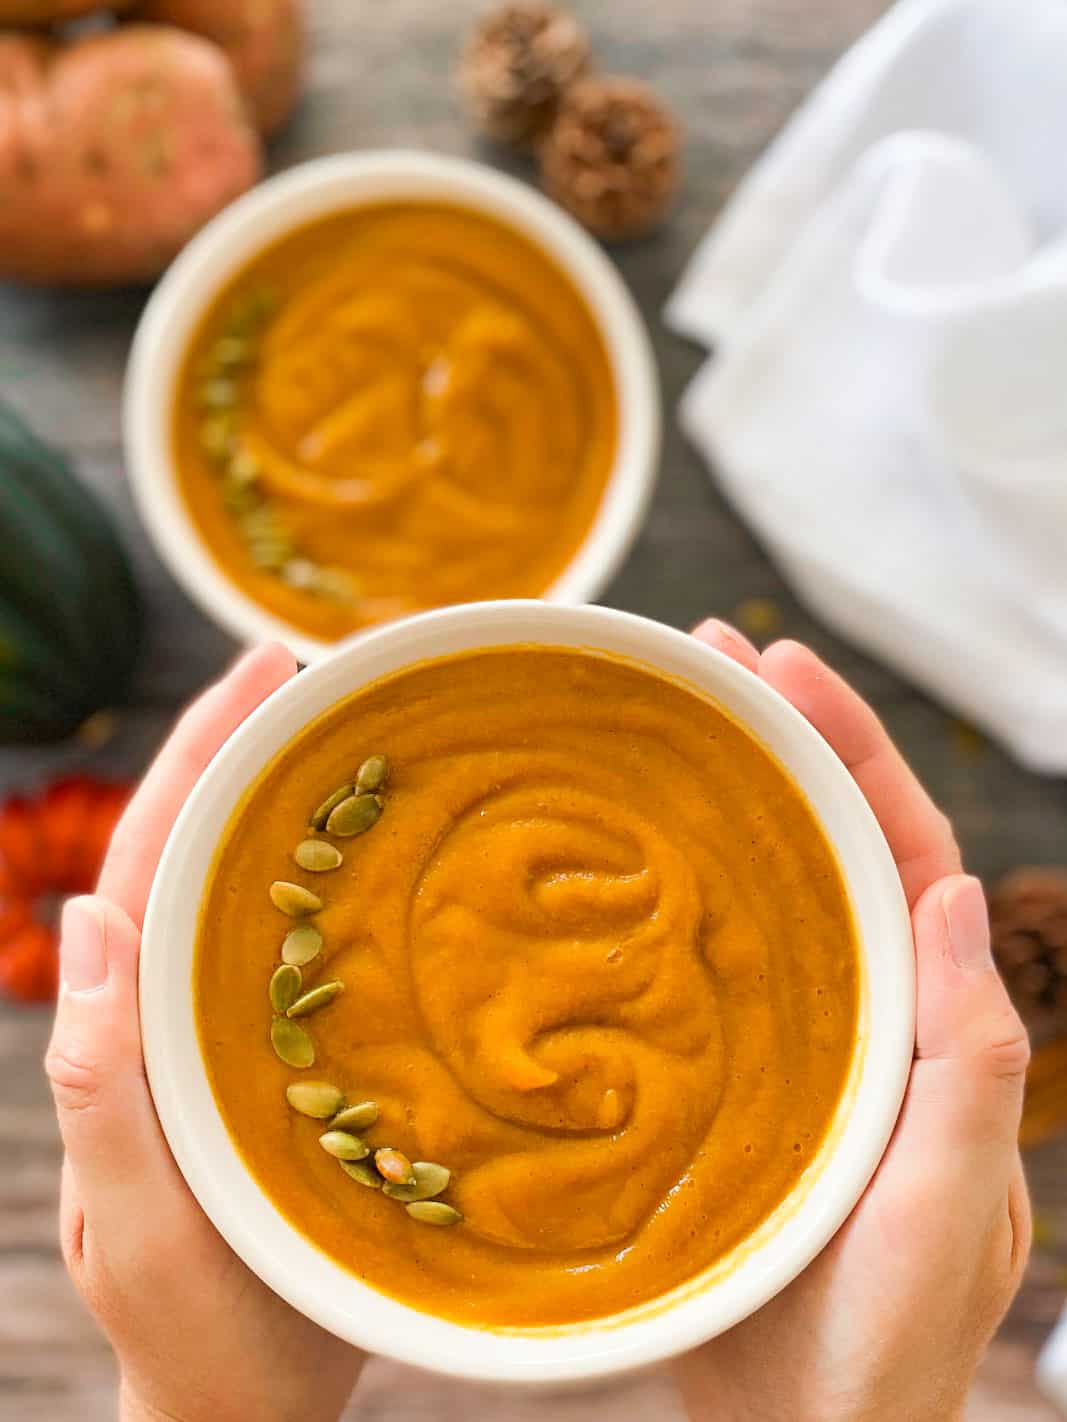 Hand holding up bowl of orange soup with pumpkin seeds on top.